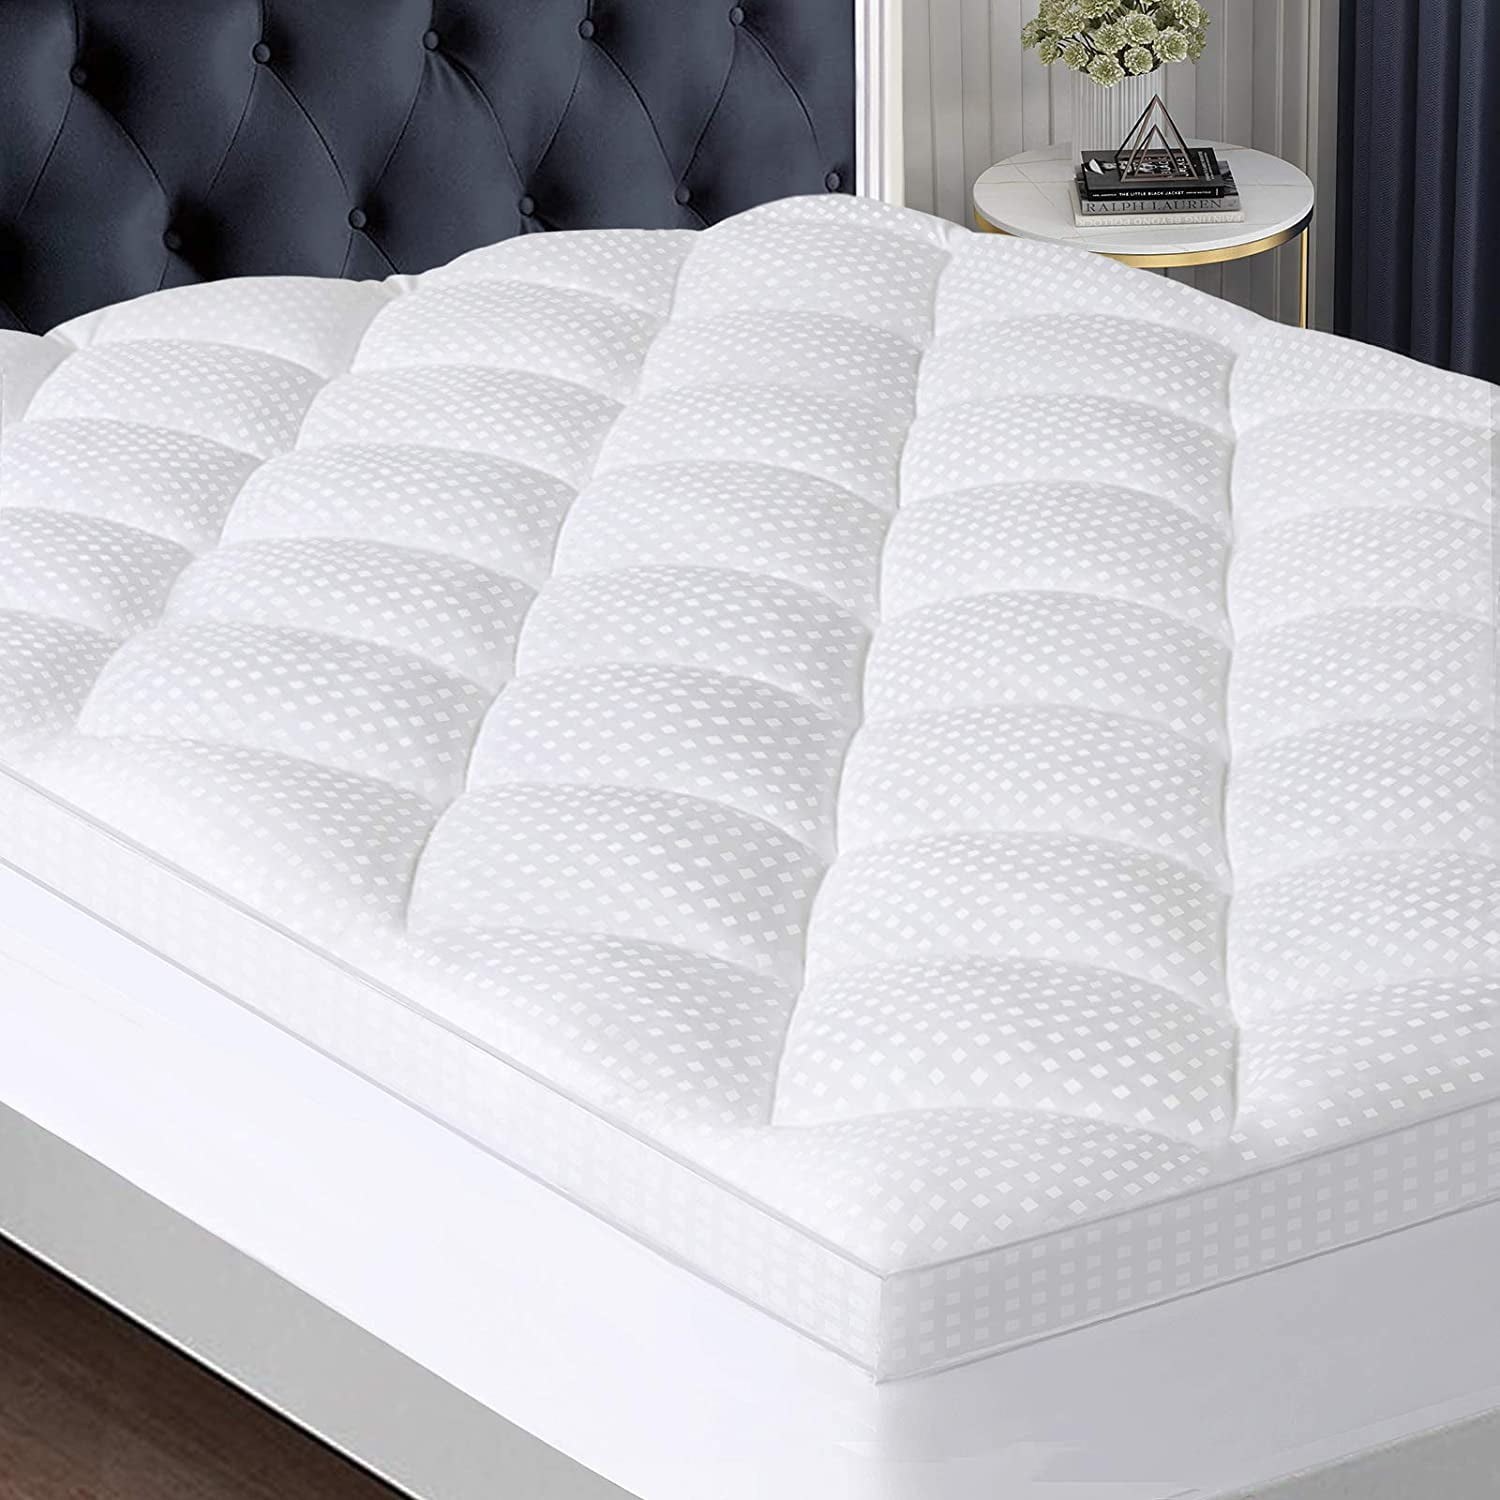 Details about   New Extra Thick Mattress Topper Cooling Matress Pad Deep Pocket Breathable Soft